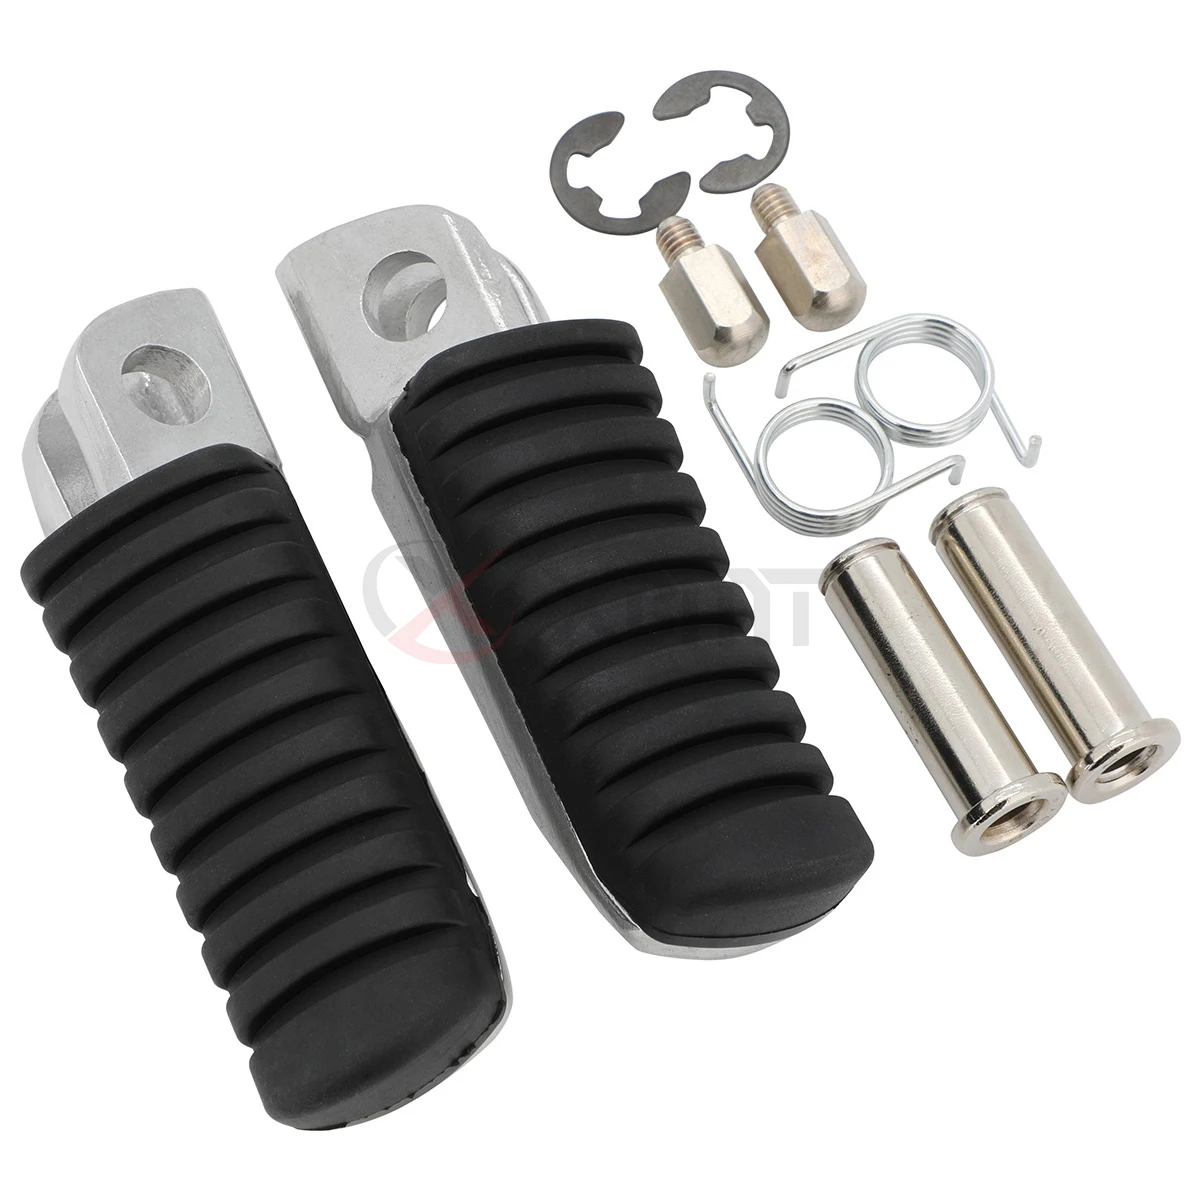 Motorcycle Front Footrests Foot Pegs For Kawasaki Z750 Z1000 Z900RS ZX6R... - $24.30